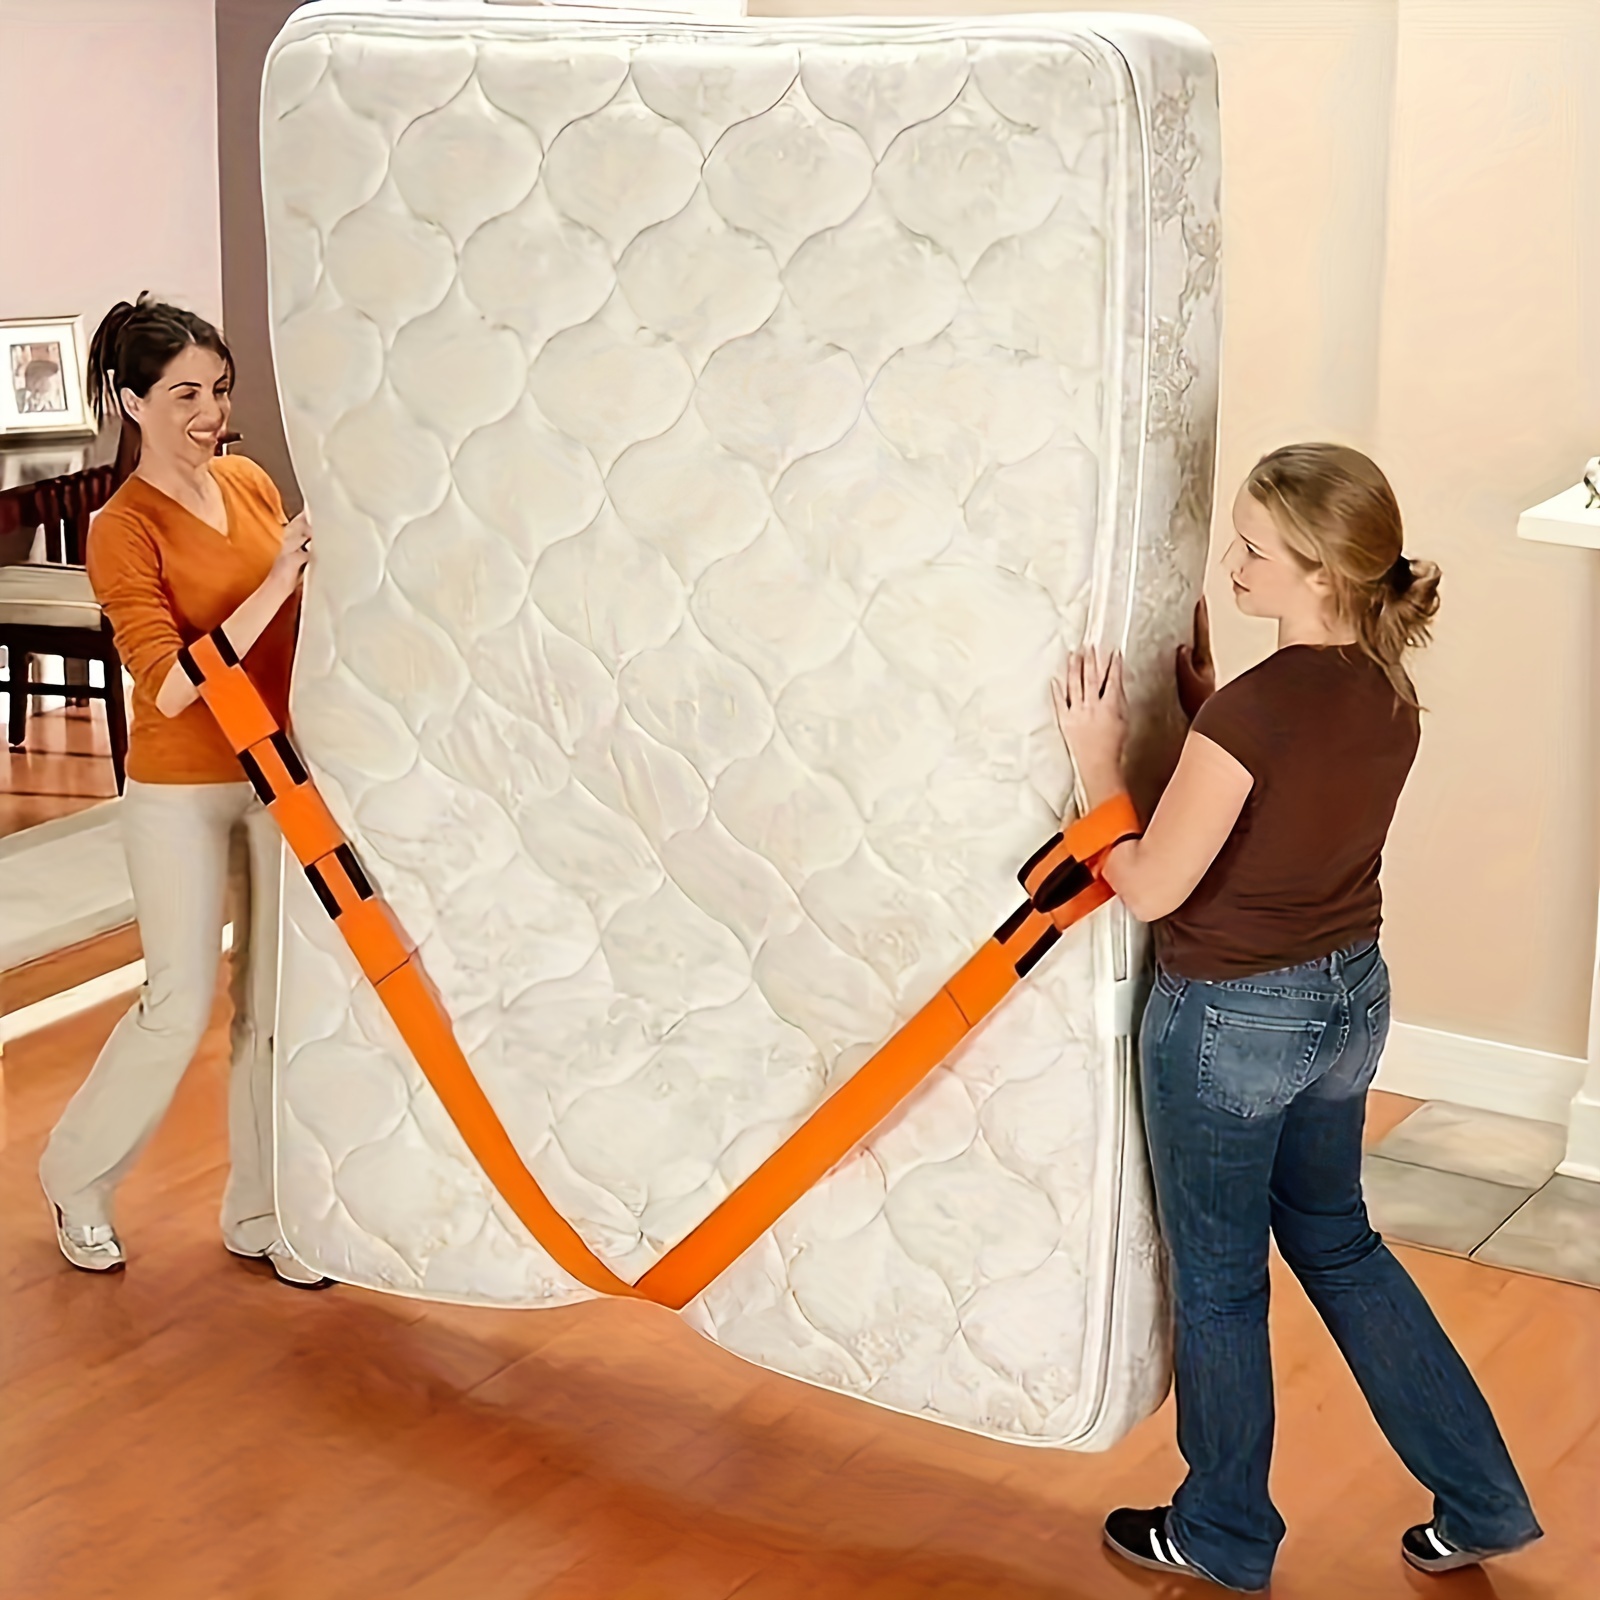 

Heavy-duty Adjustable Furniture Moving Straps - Ergonomic Lifting & Transport Aid, Secure And Safe Home Moving Essentials